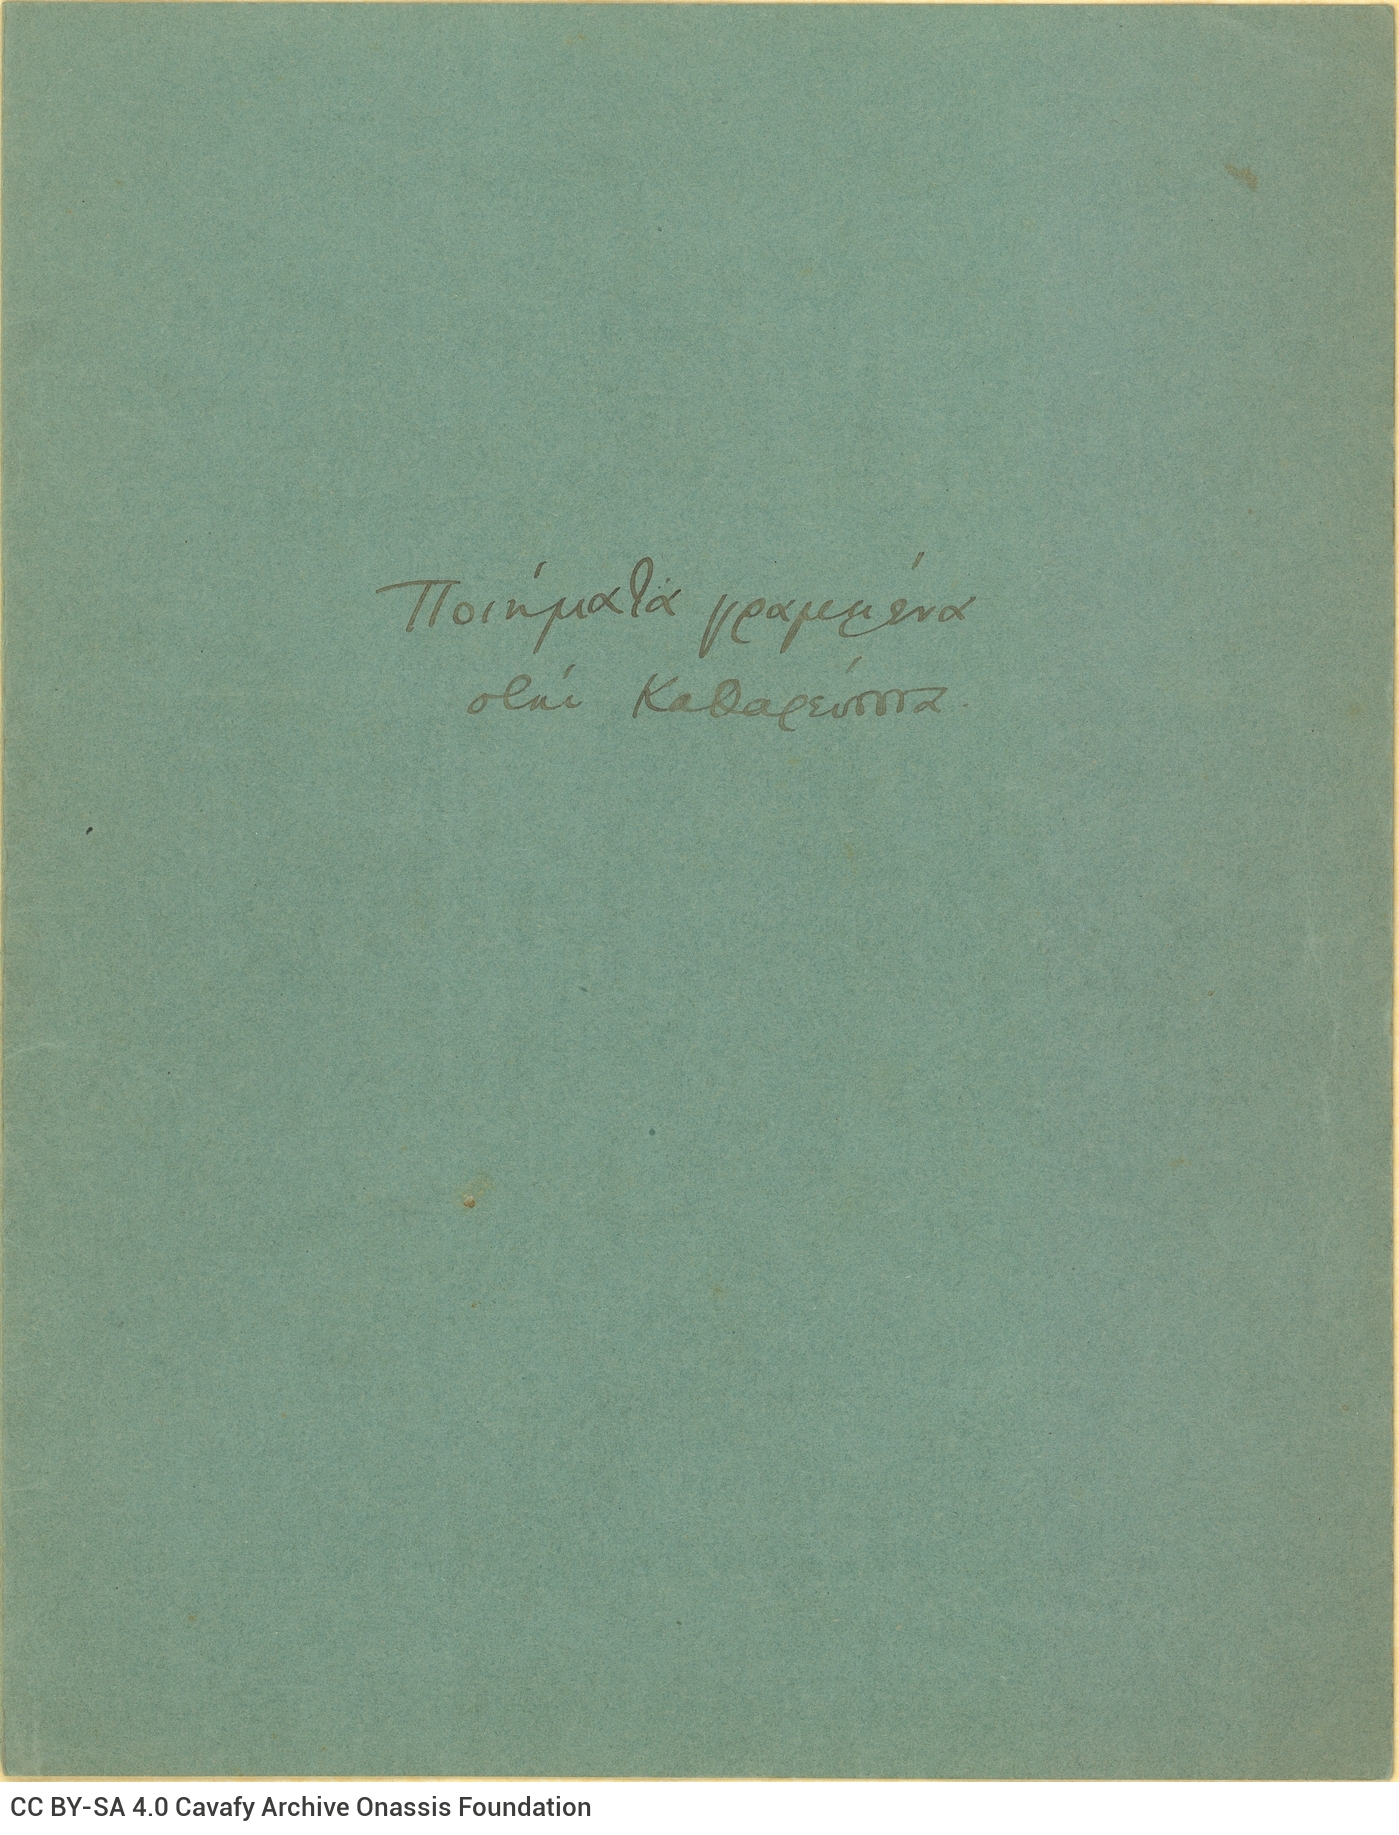 Green paperboard folder. On the first page, the handwritten title "Poems written in katharevousa". On the second and third